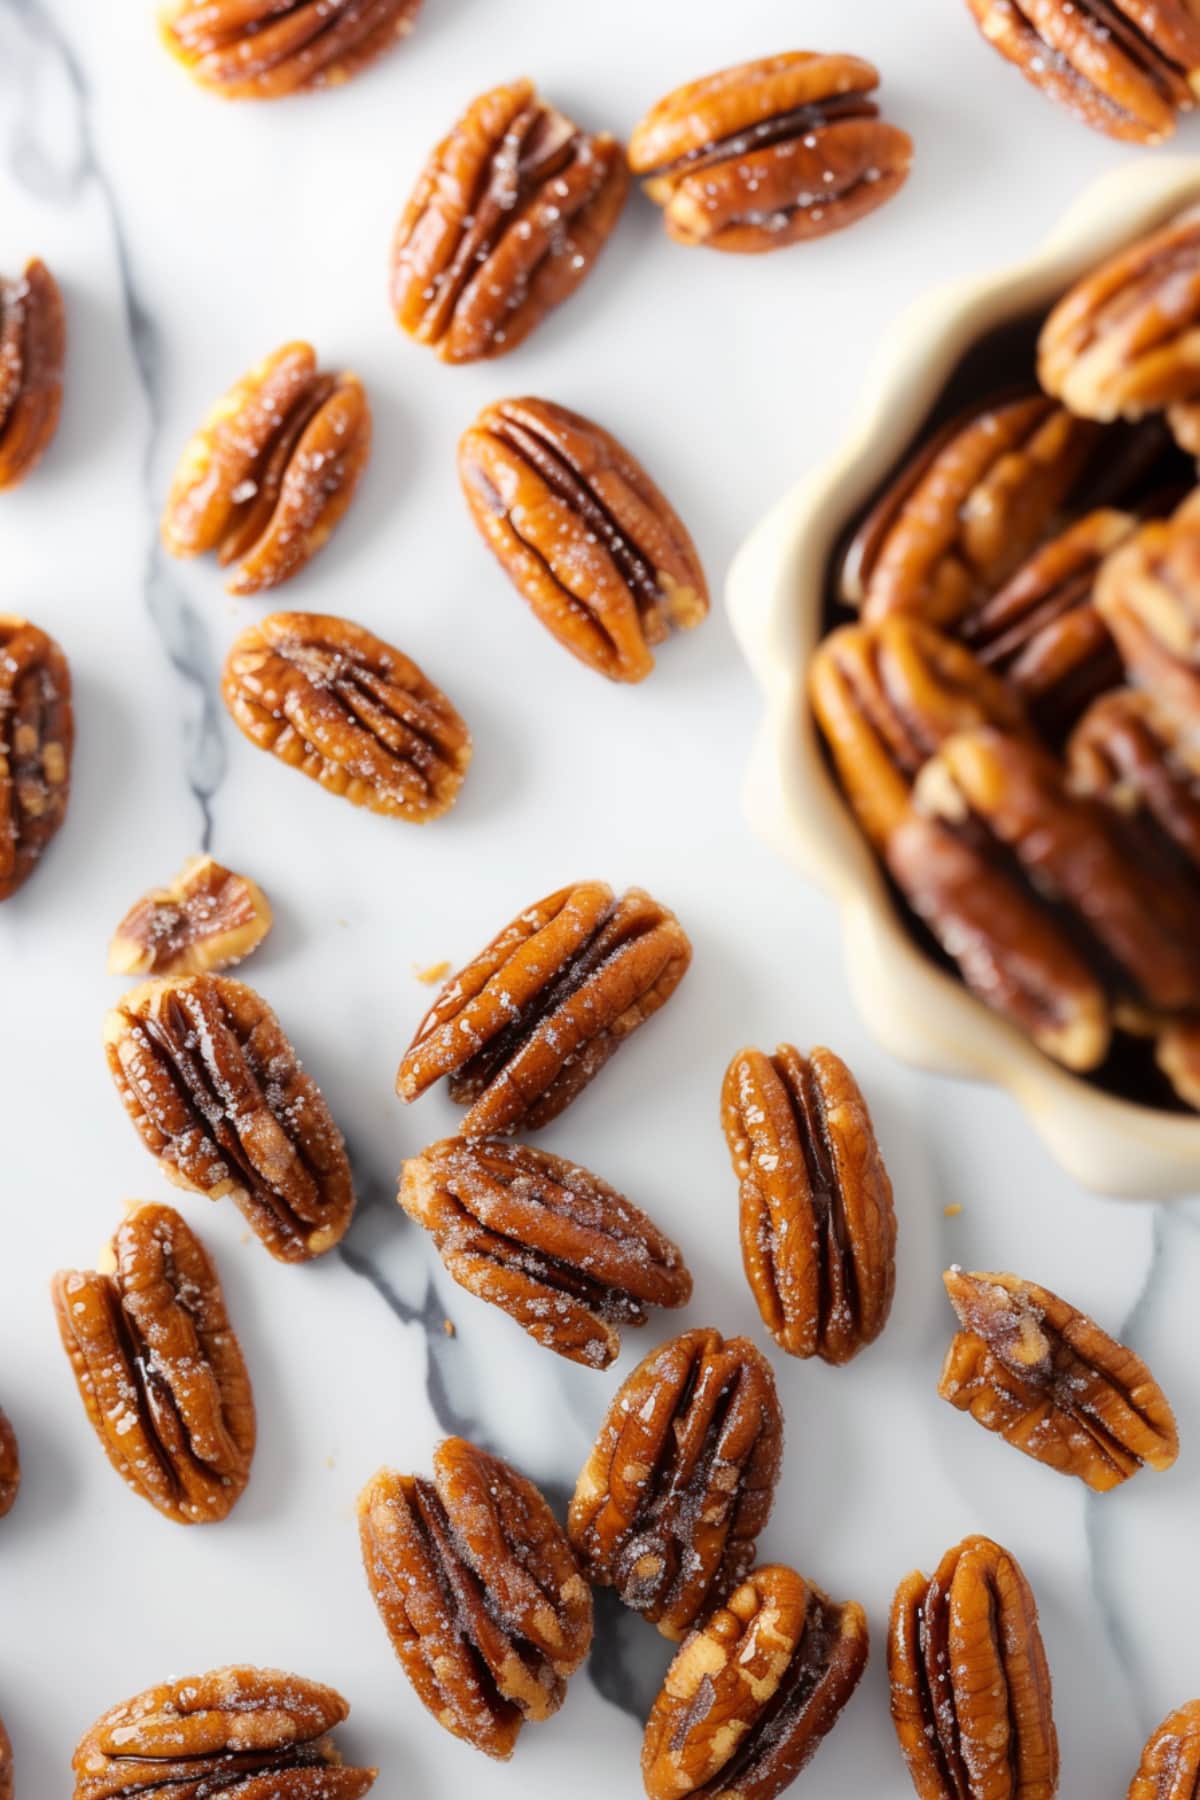 Candied pecans, a delicious and healthy snack option